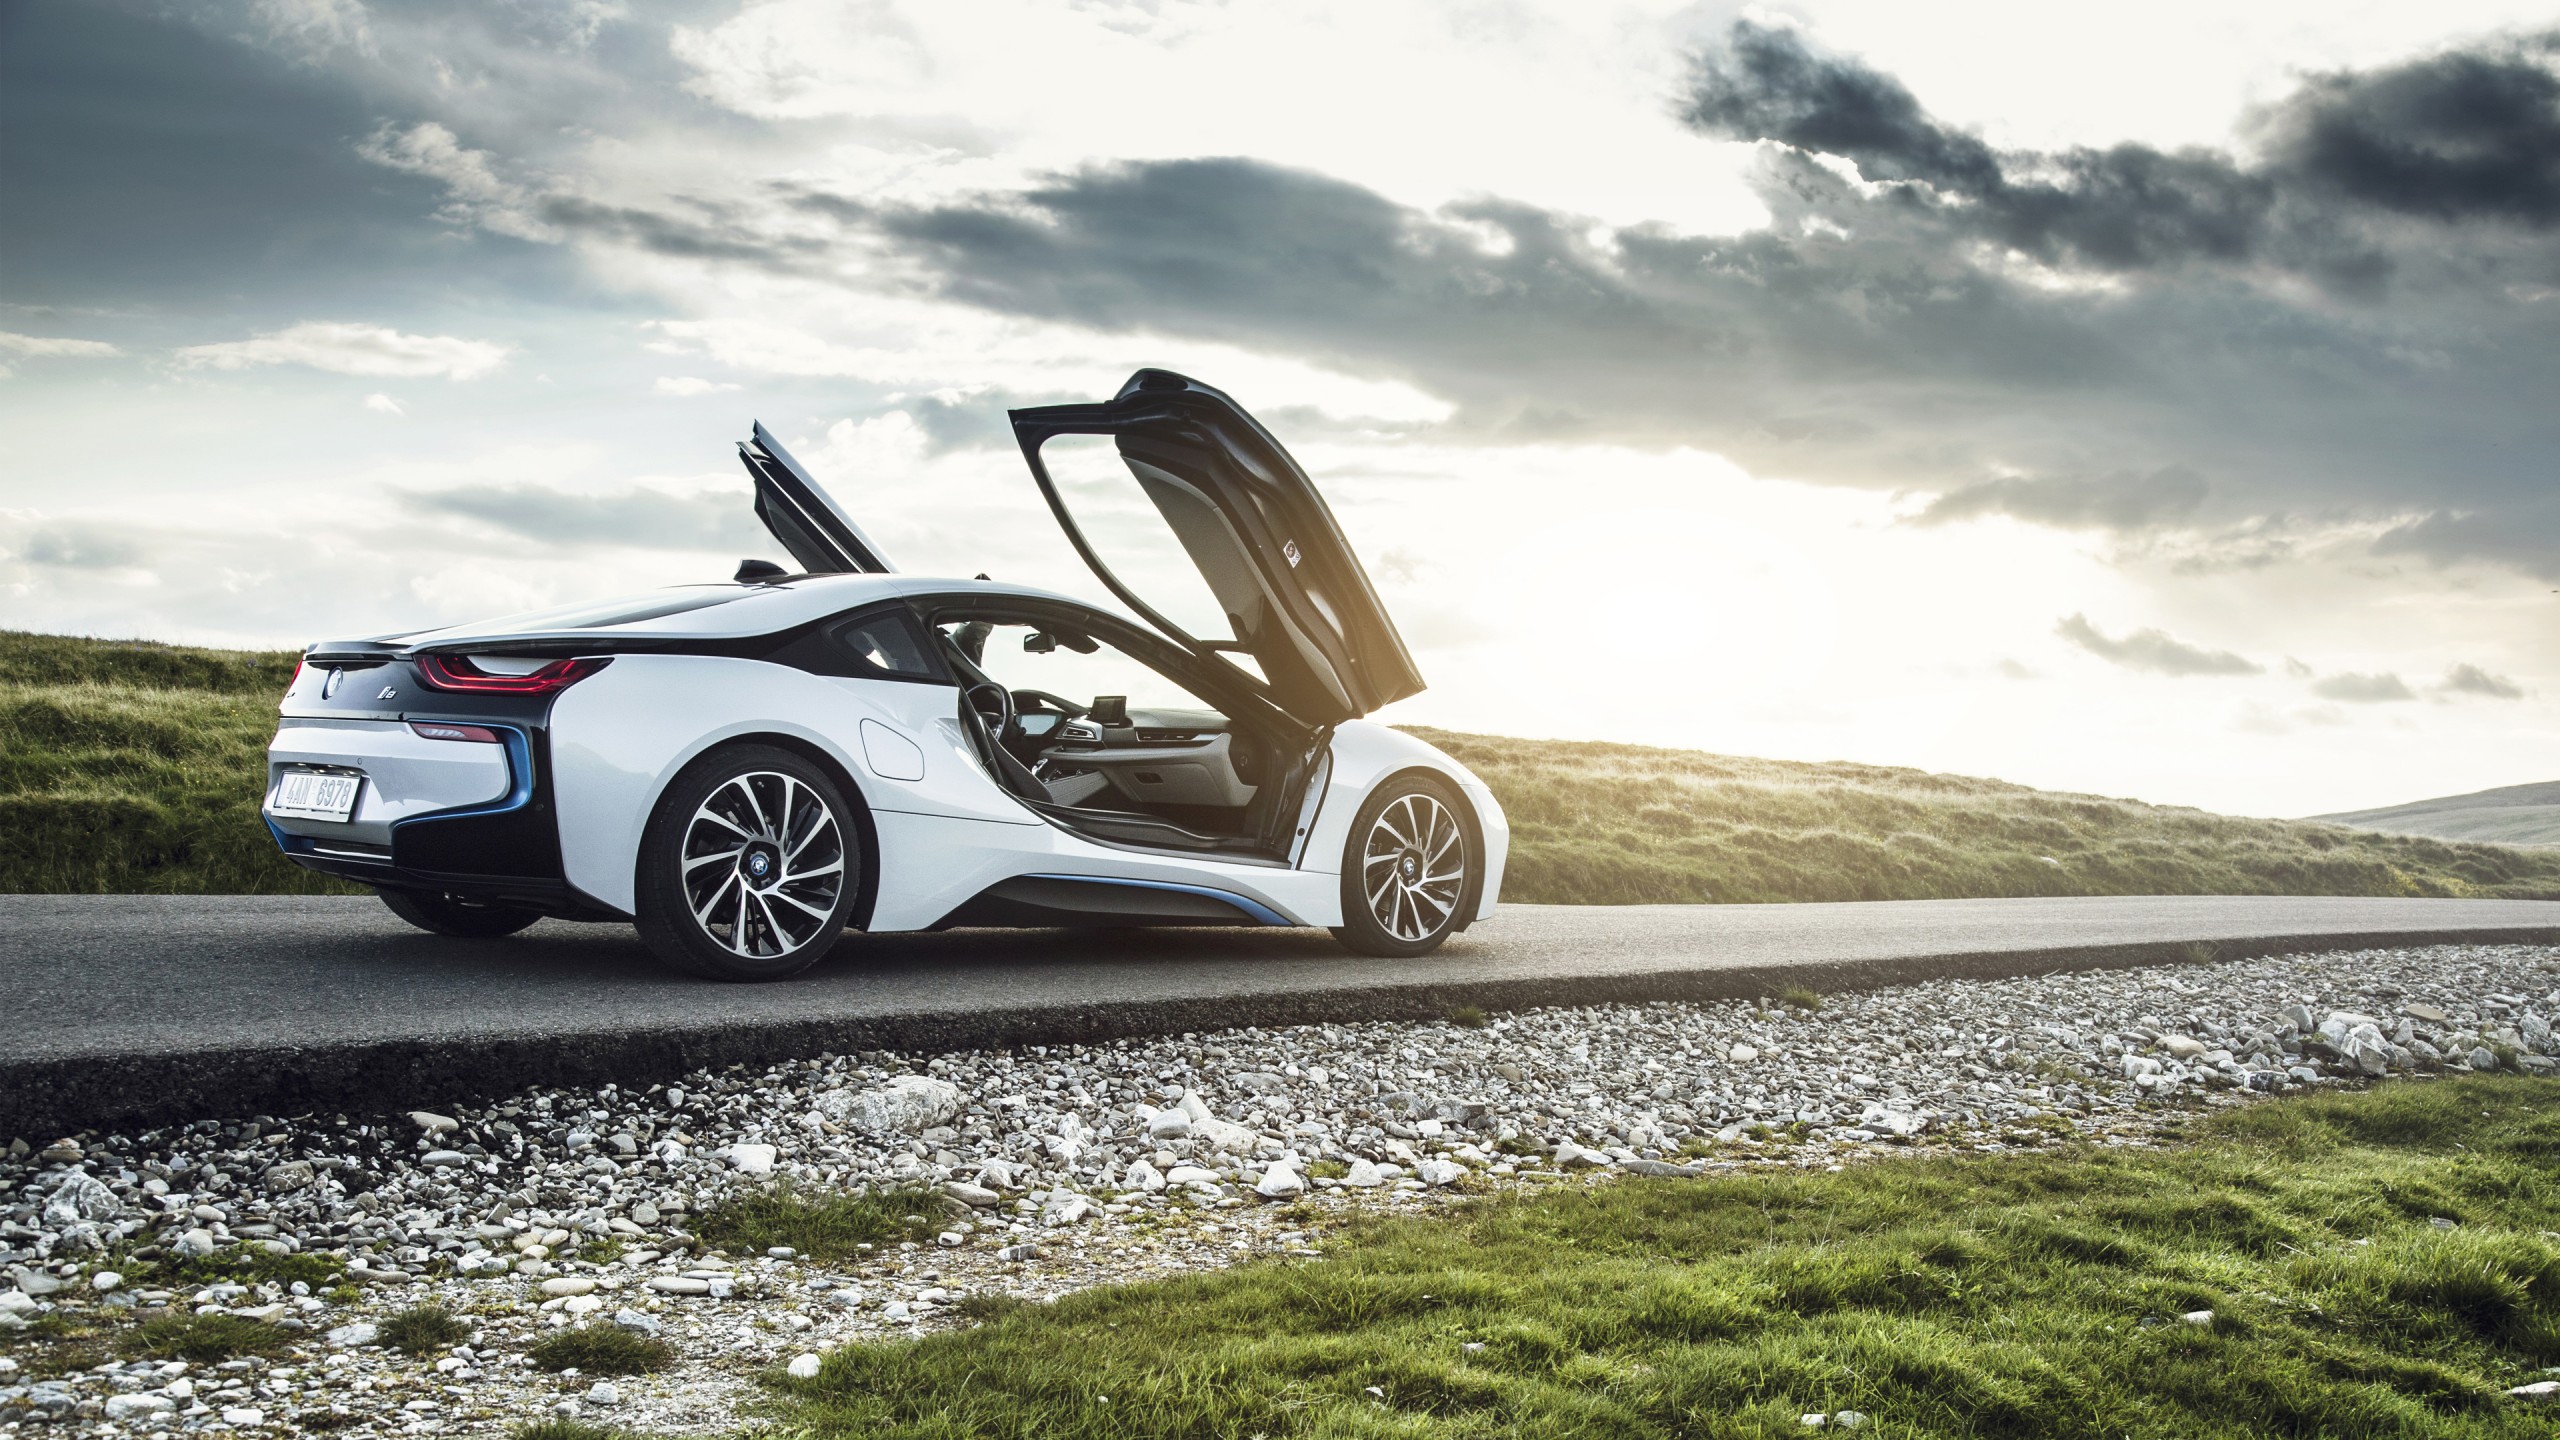 BMW i8 Side View Wallpaper  HD Car Wallpapers  ID 6004